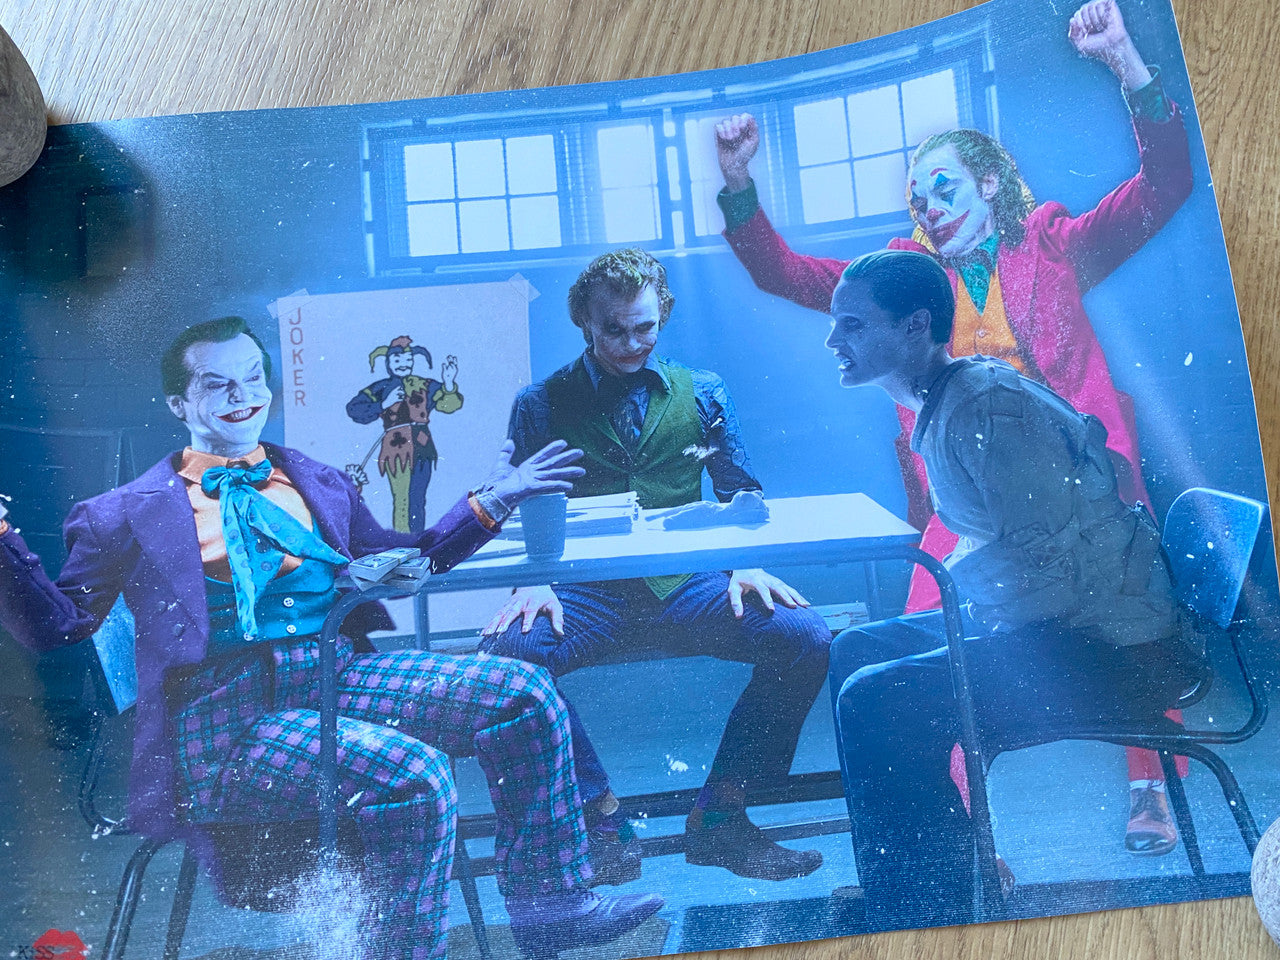 NEW: 4 Jokers Meeting KiSS Poster or Canvas - Jack Nicholson, Heath Ledger, Jared Leto Joaquin Phoenix - Why so Serious, Wall Art - Batman - gift for him & her